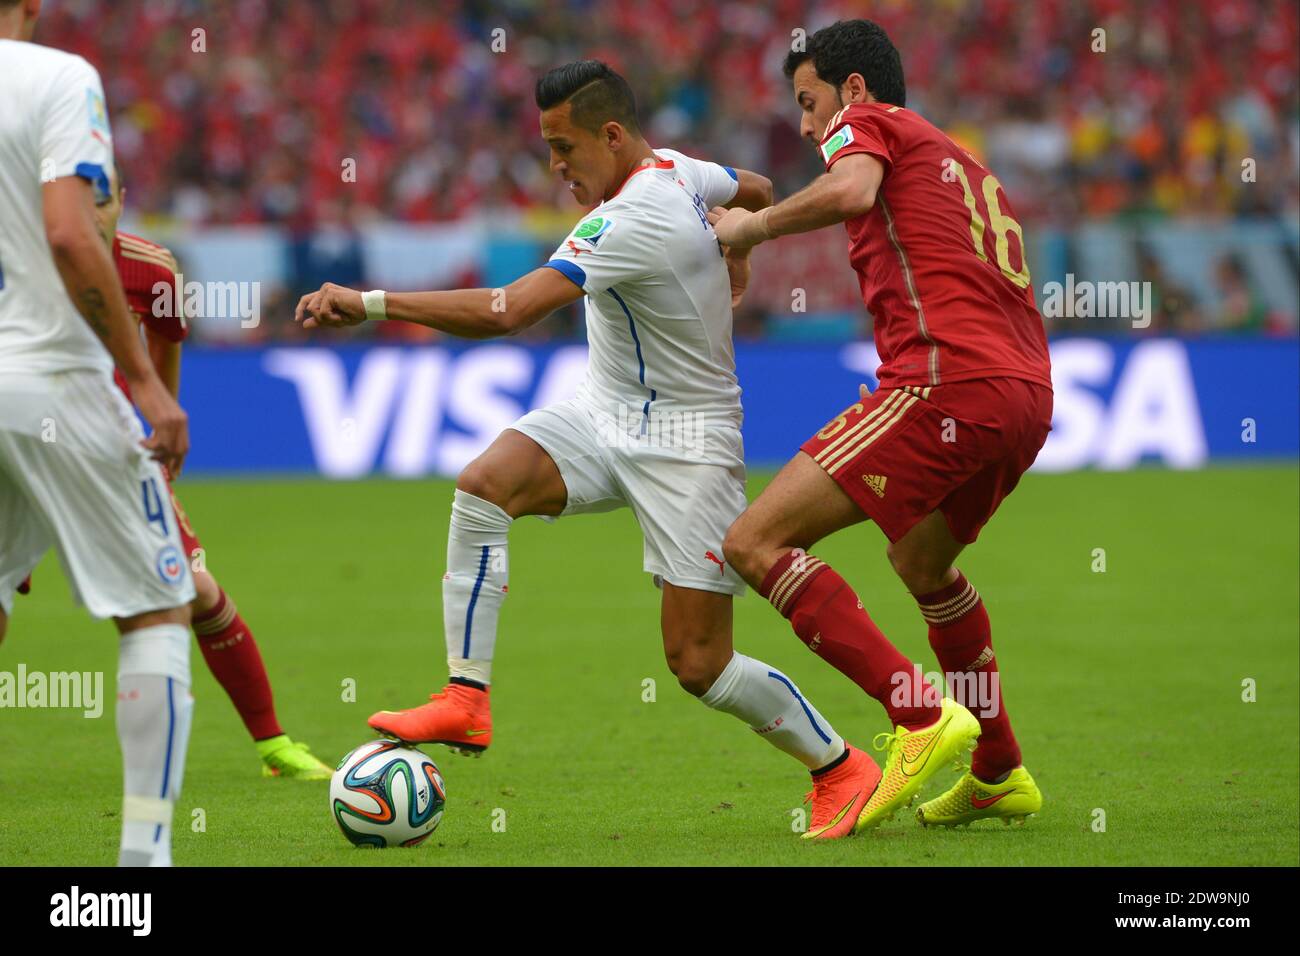 Spain's Sergio Busquets battling Chile's Alexis Sanchez during Soccer World Cup 2014 First round Group B match Spain v Chile at Maracana Stadium, Rio de Janeiro, Brazil , on June 18, 2014. Chile won 2-0 and ousted the defending champions from the competition. Photo by Henri Szwarc/ABACAPRESS.COM Stock Photo